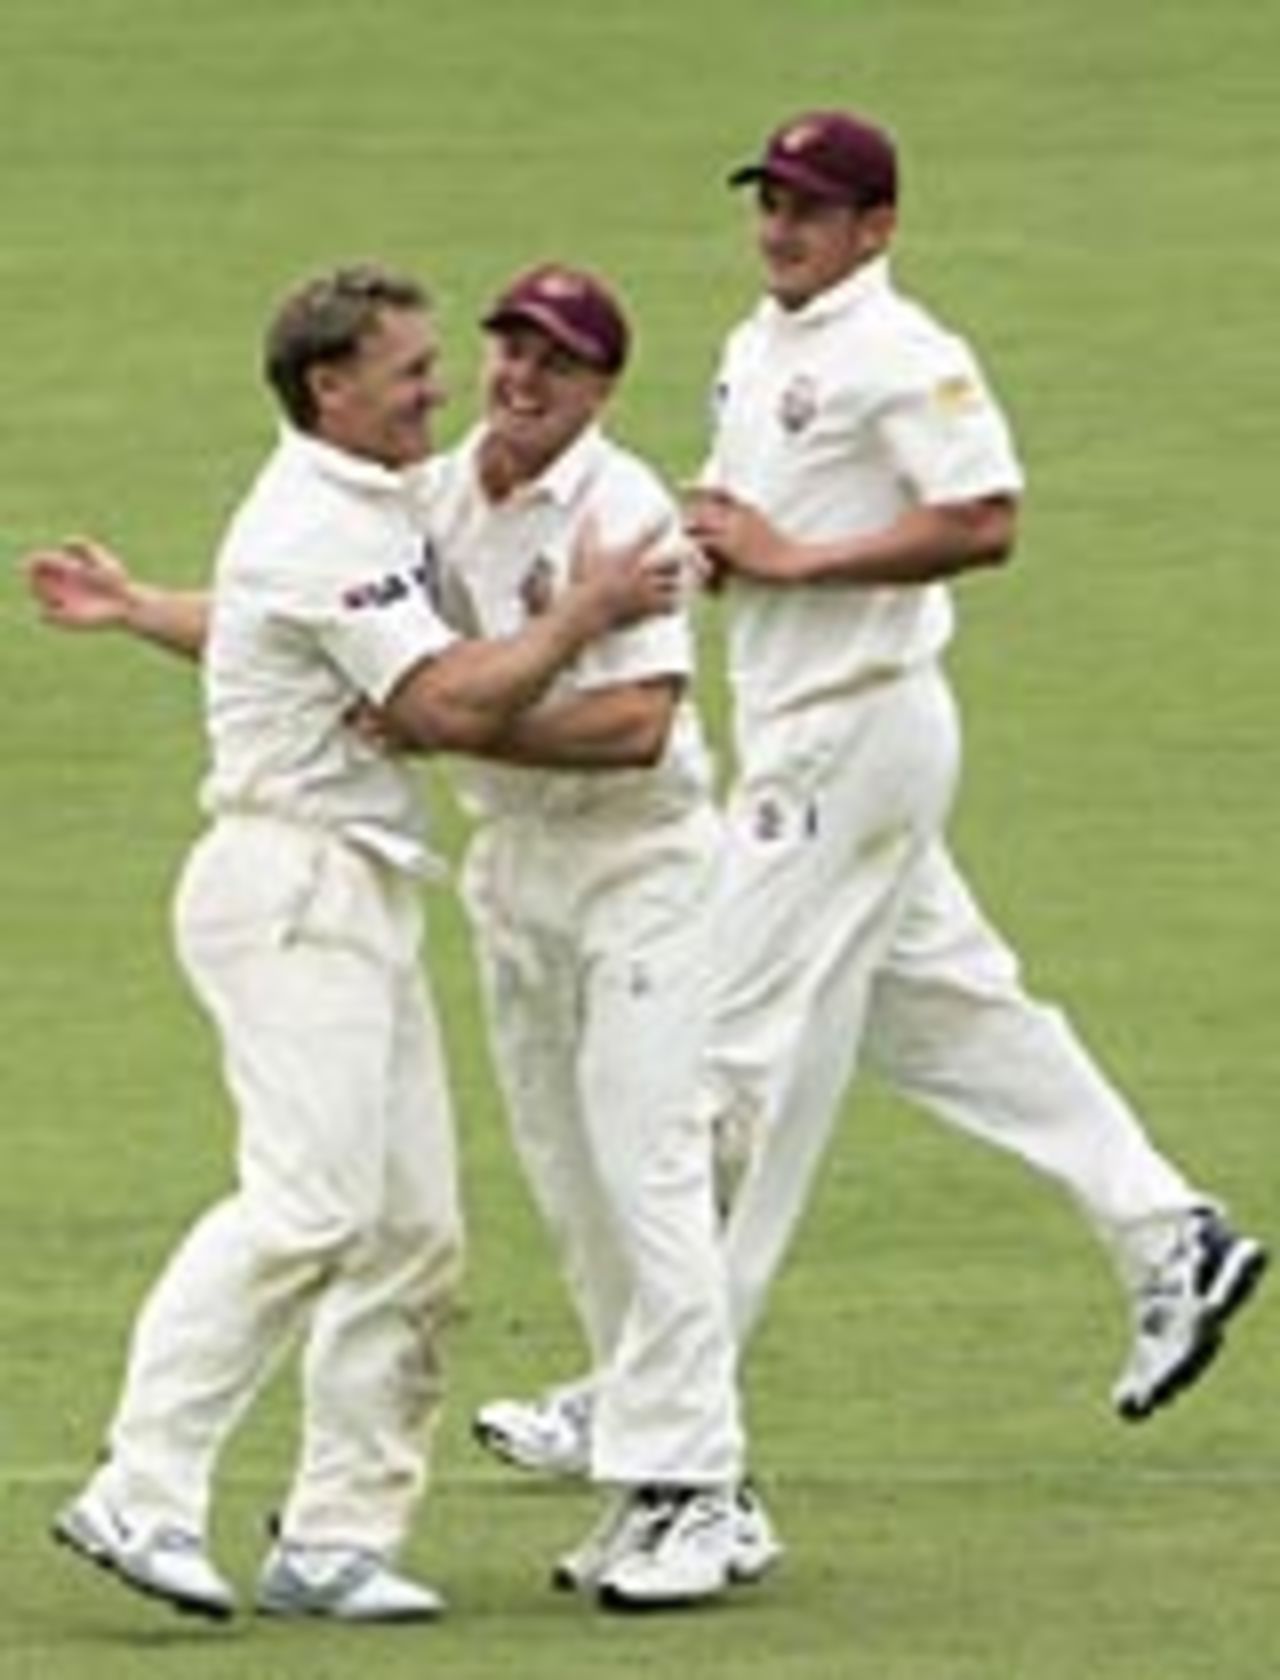 Andy Bichel celebrates his fourth wicket, South Australia v Queensland, Adelaide Oval, November 10, 2004